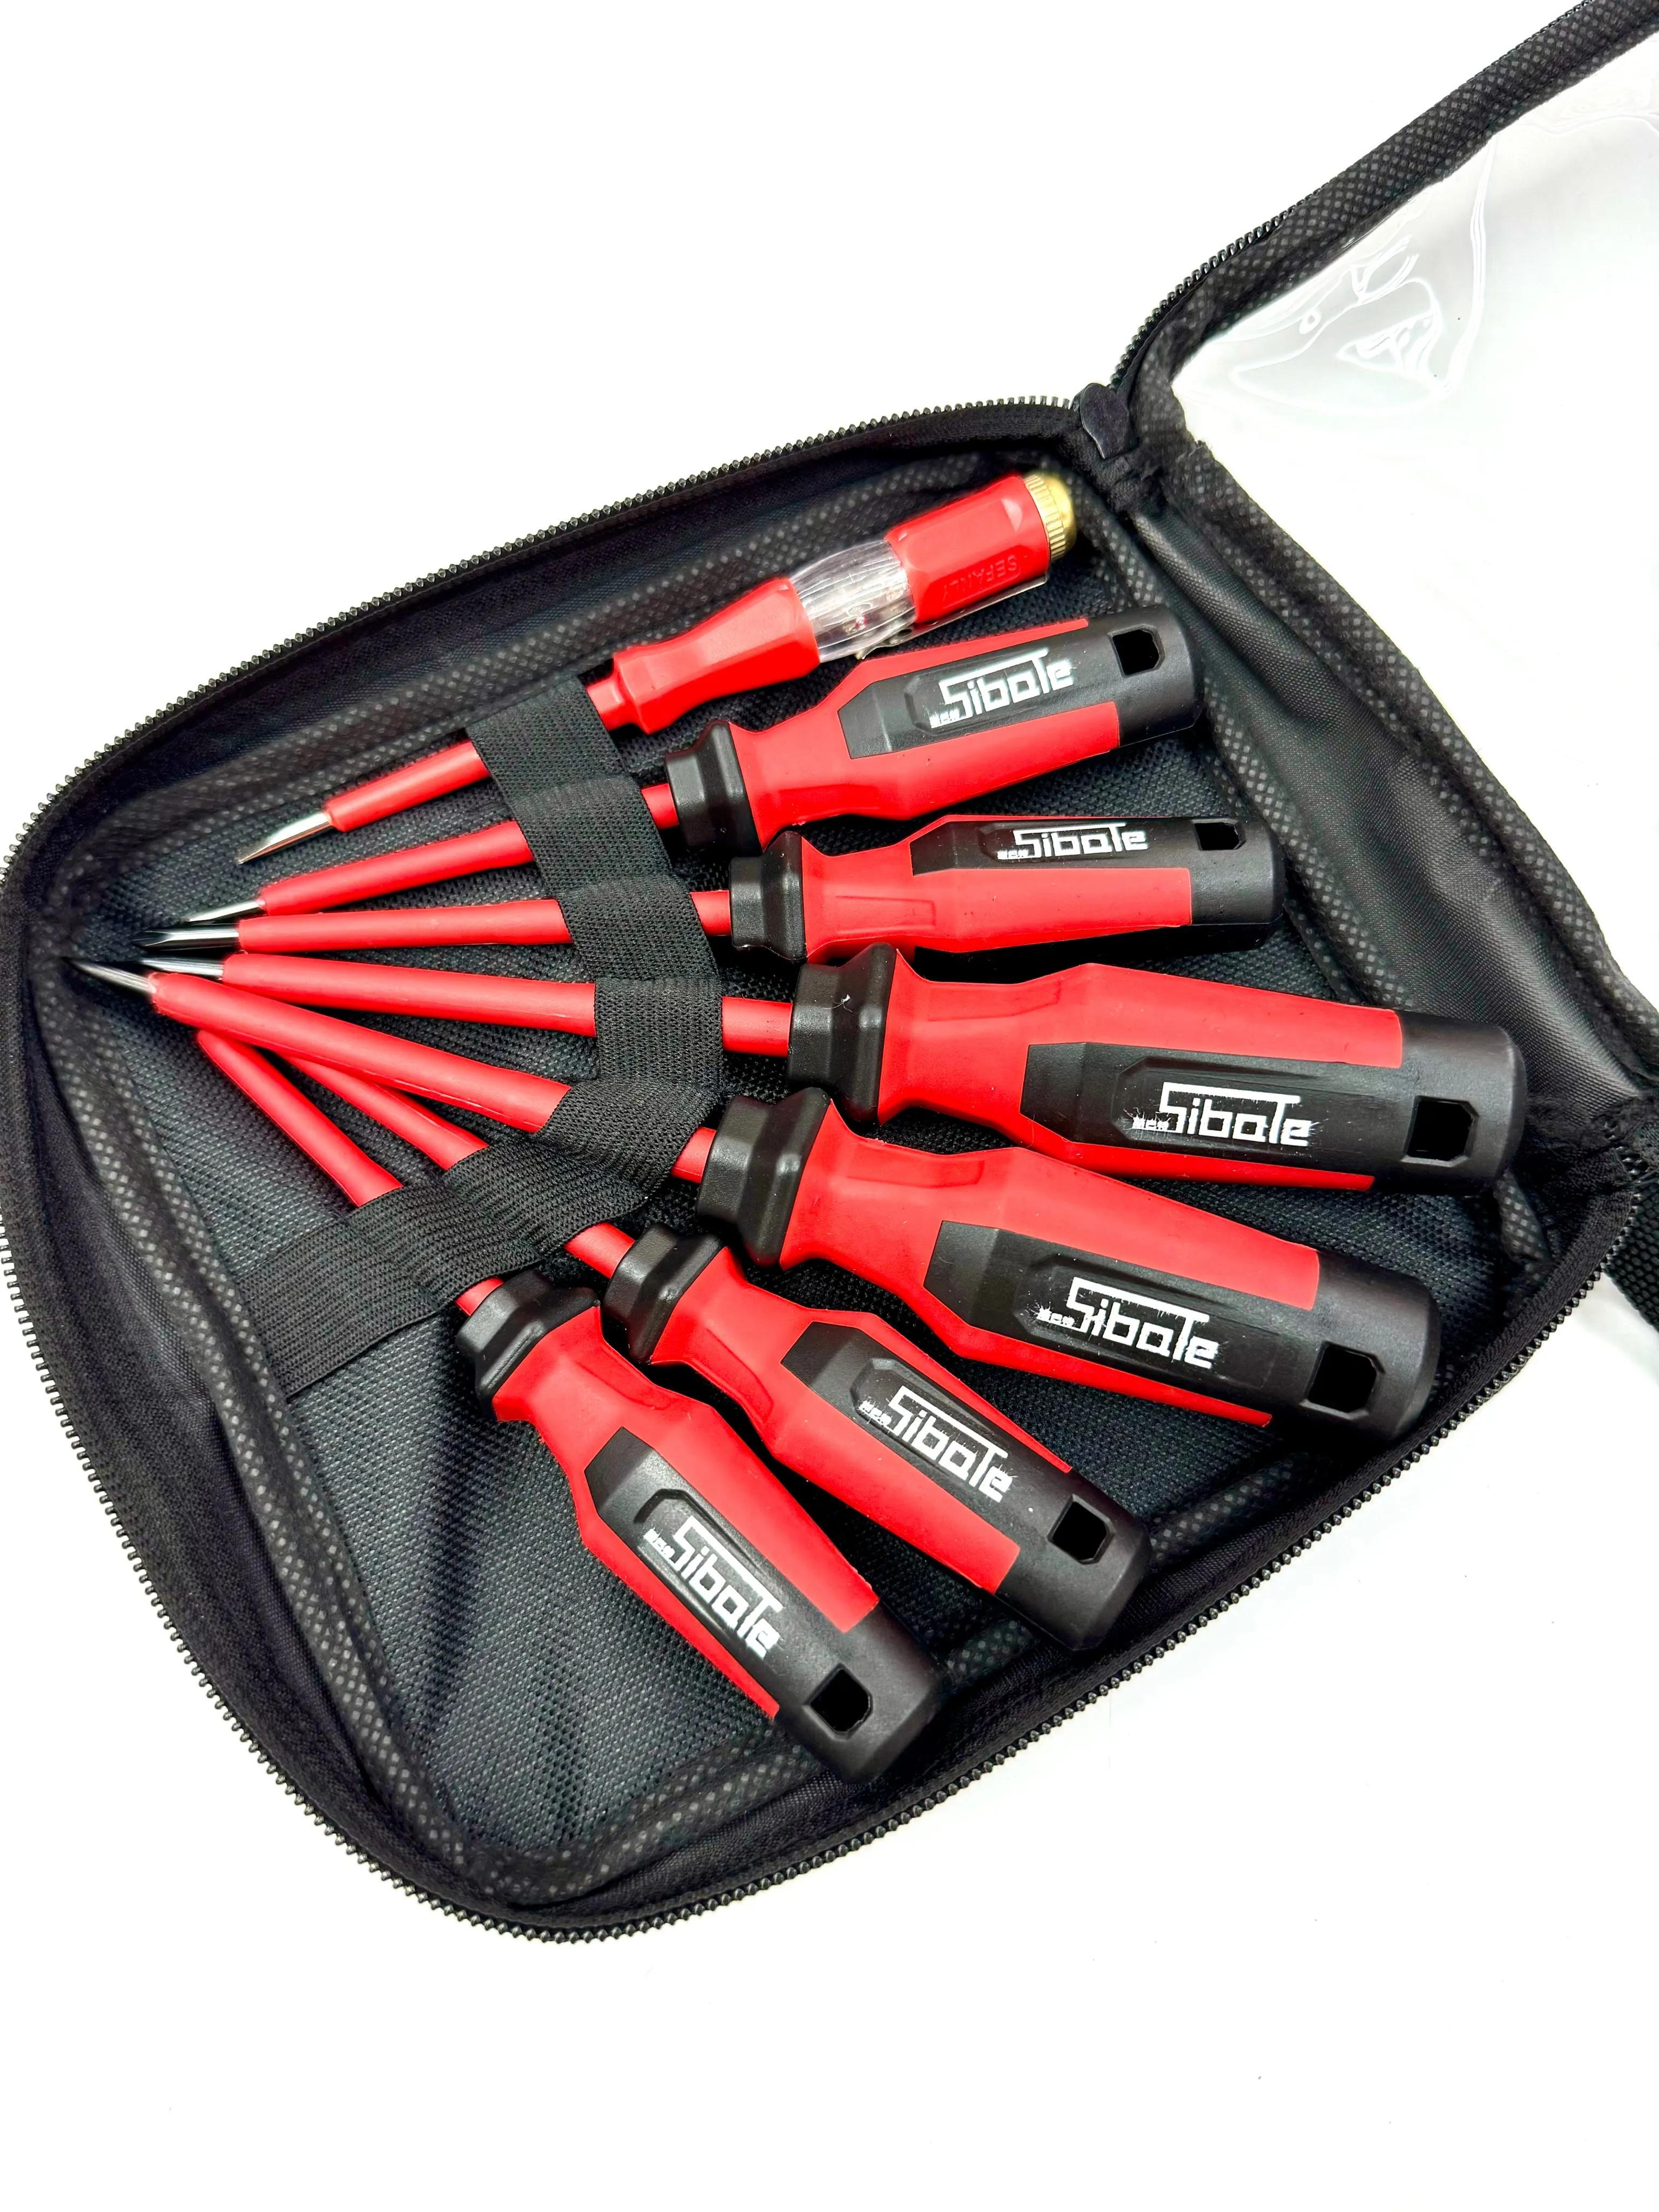 GK-C046 Bagged multifunctional and large-sized customized manual red plum blossom head 8pc screwdriver set for twisting